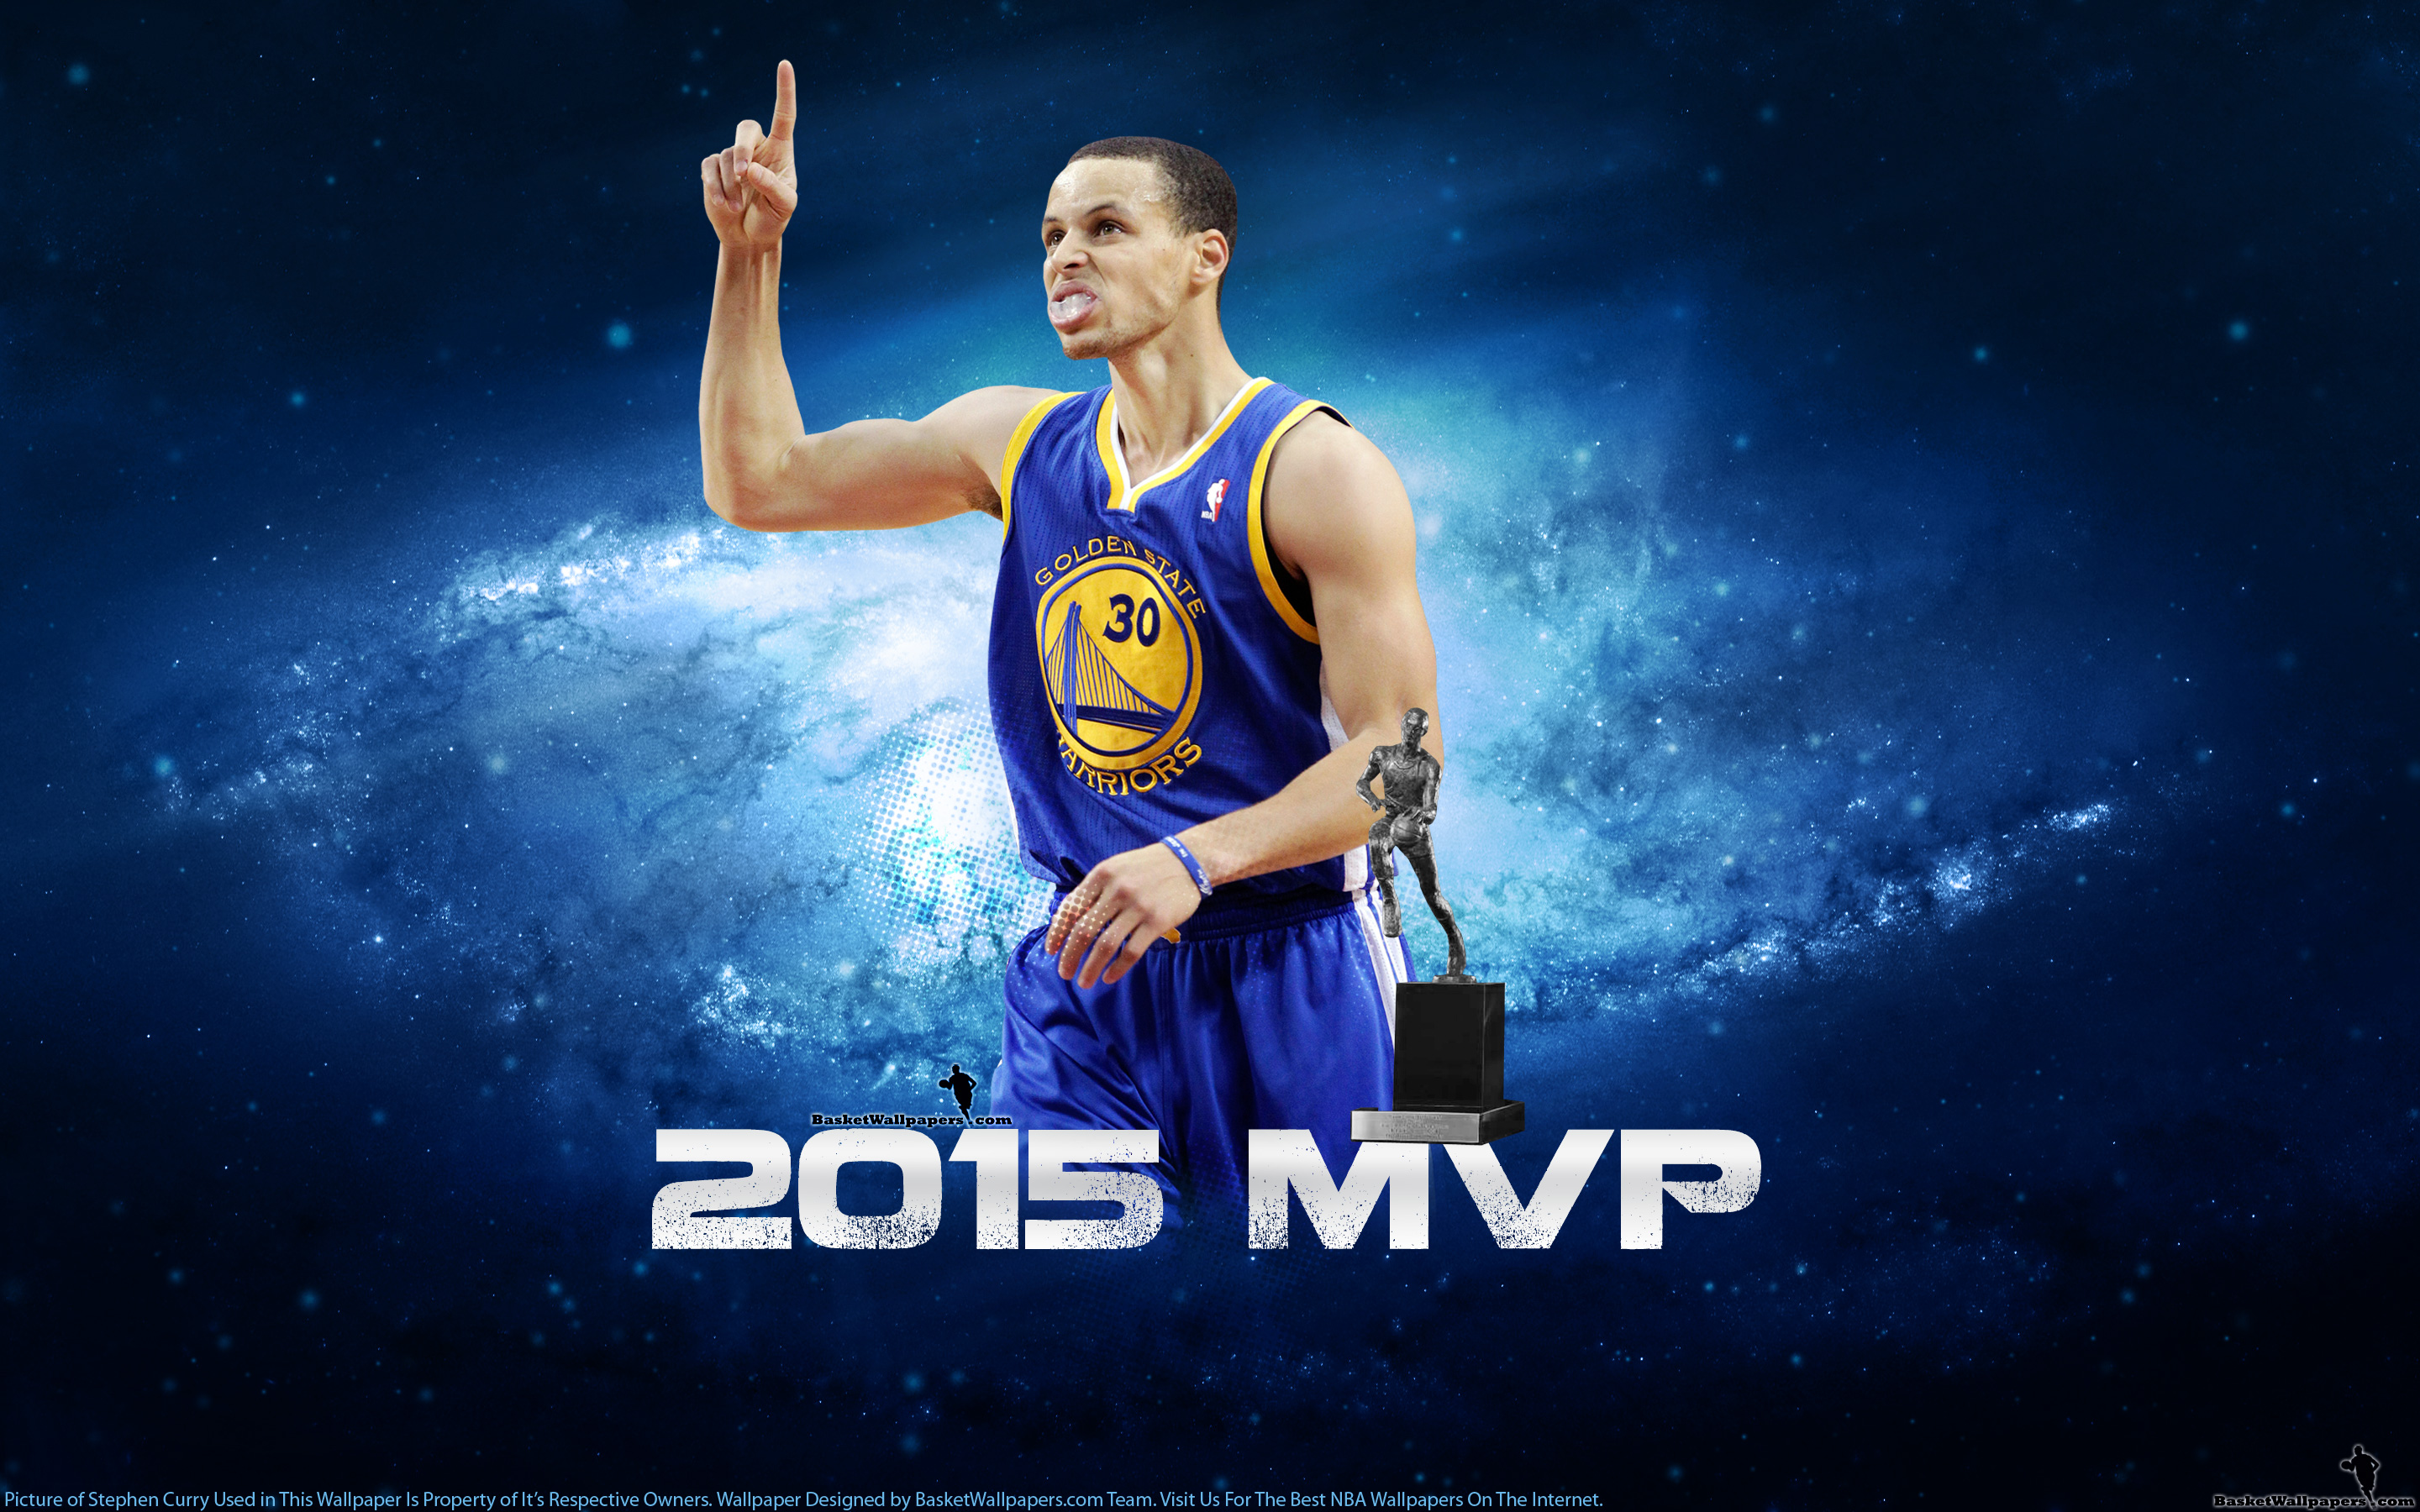 MVP MVP MVP  Stephen curry pictures, Nba pictures, Stephen curry wallpaper